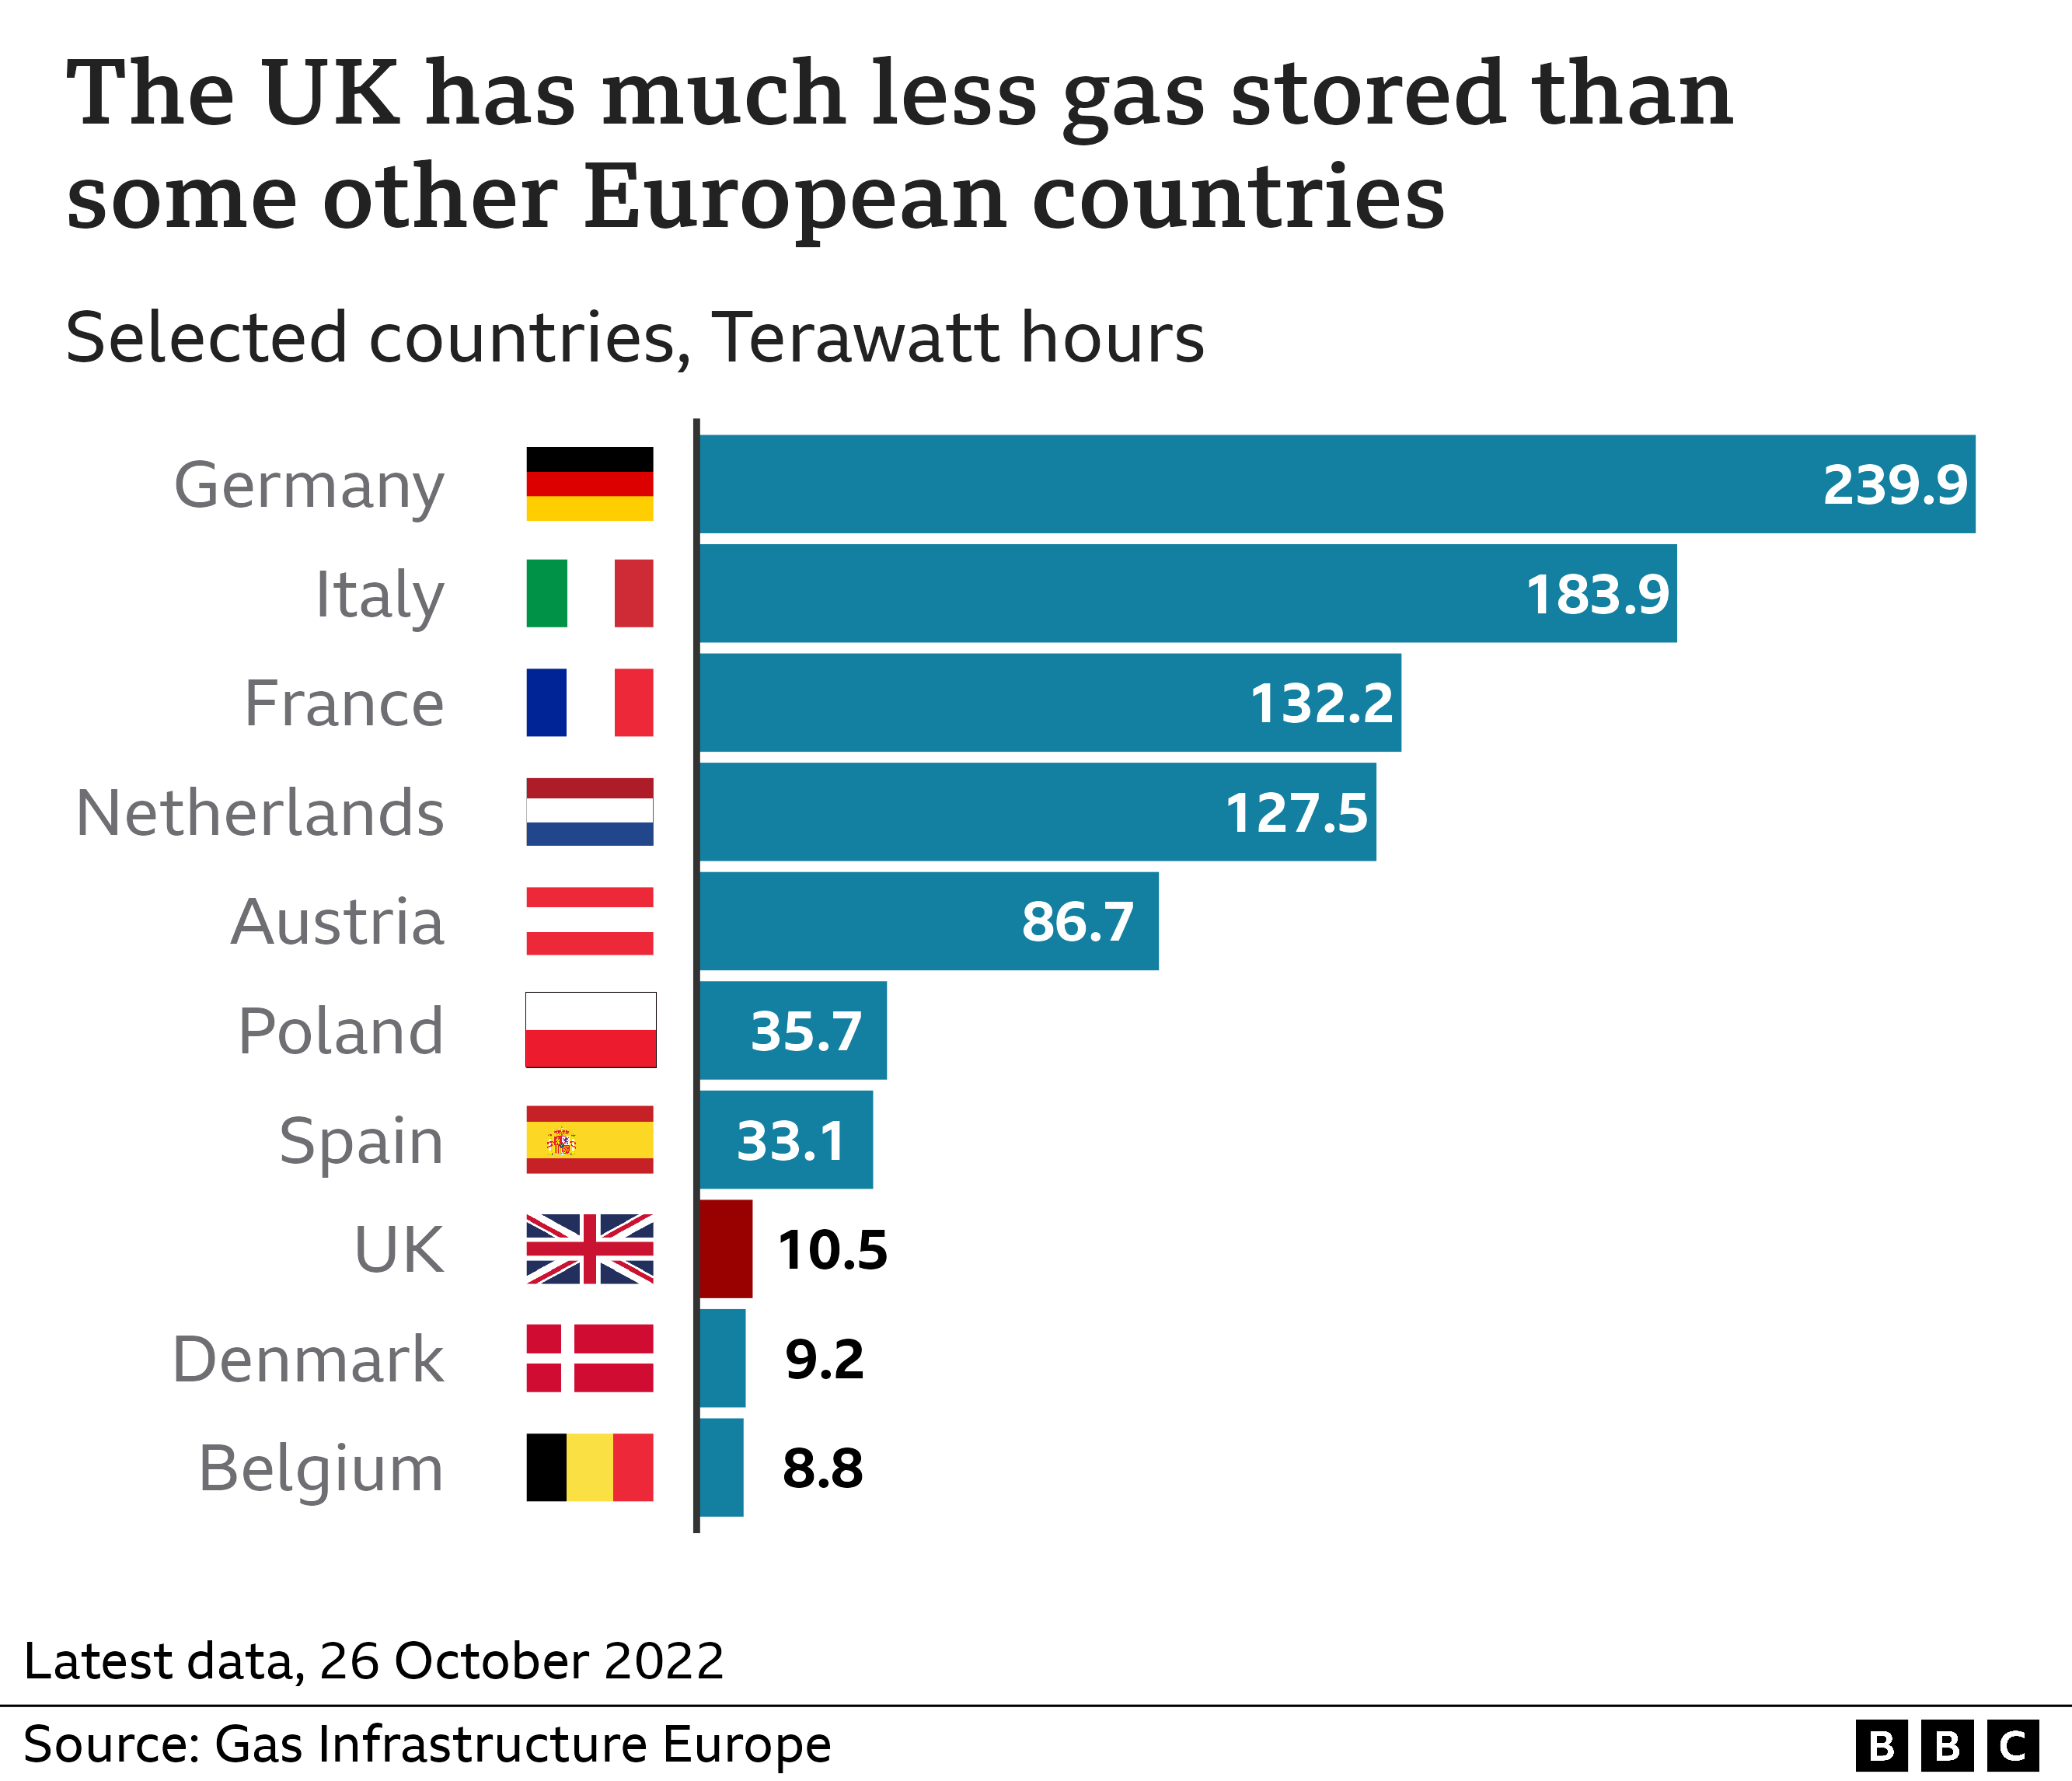 Chart showing gas storage in different countries